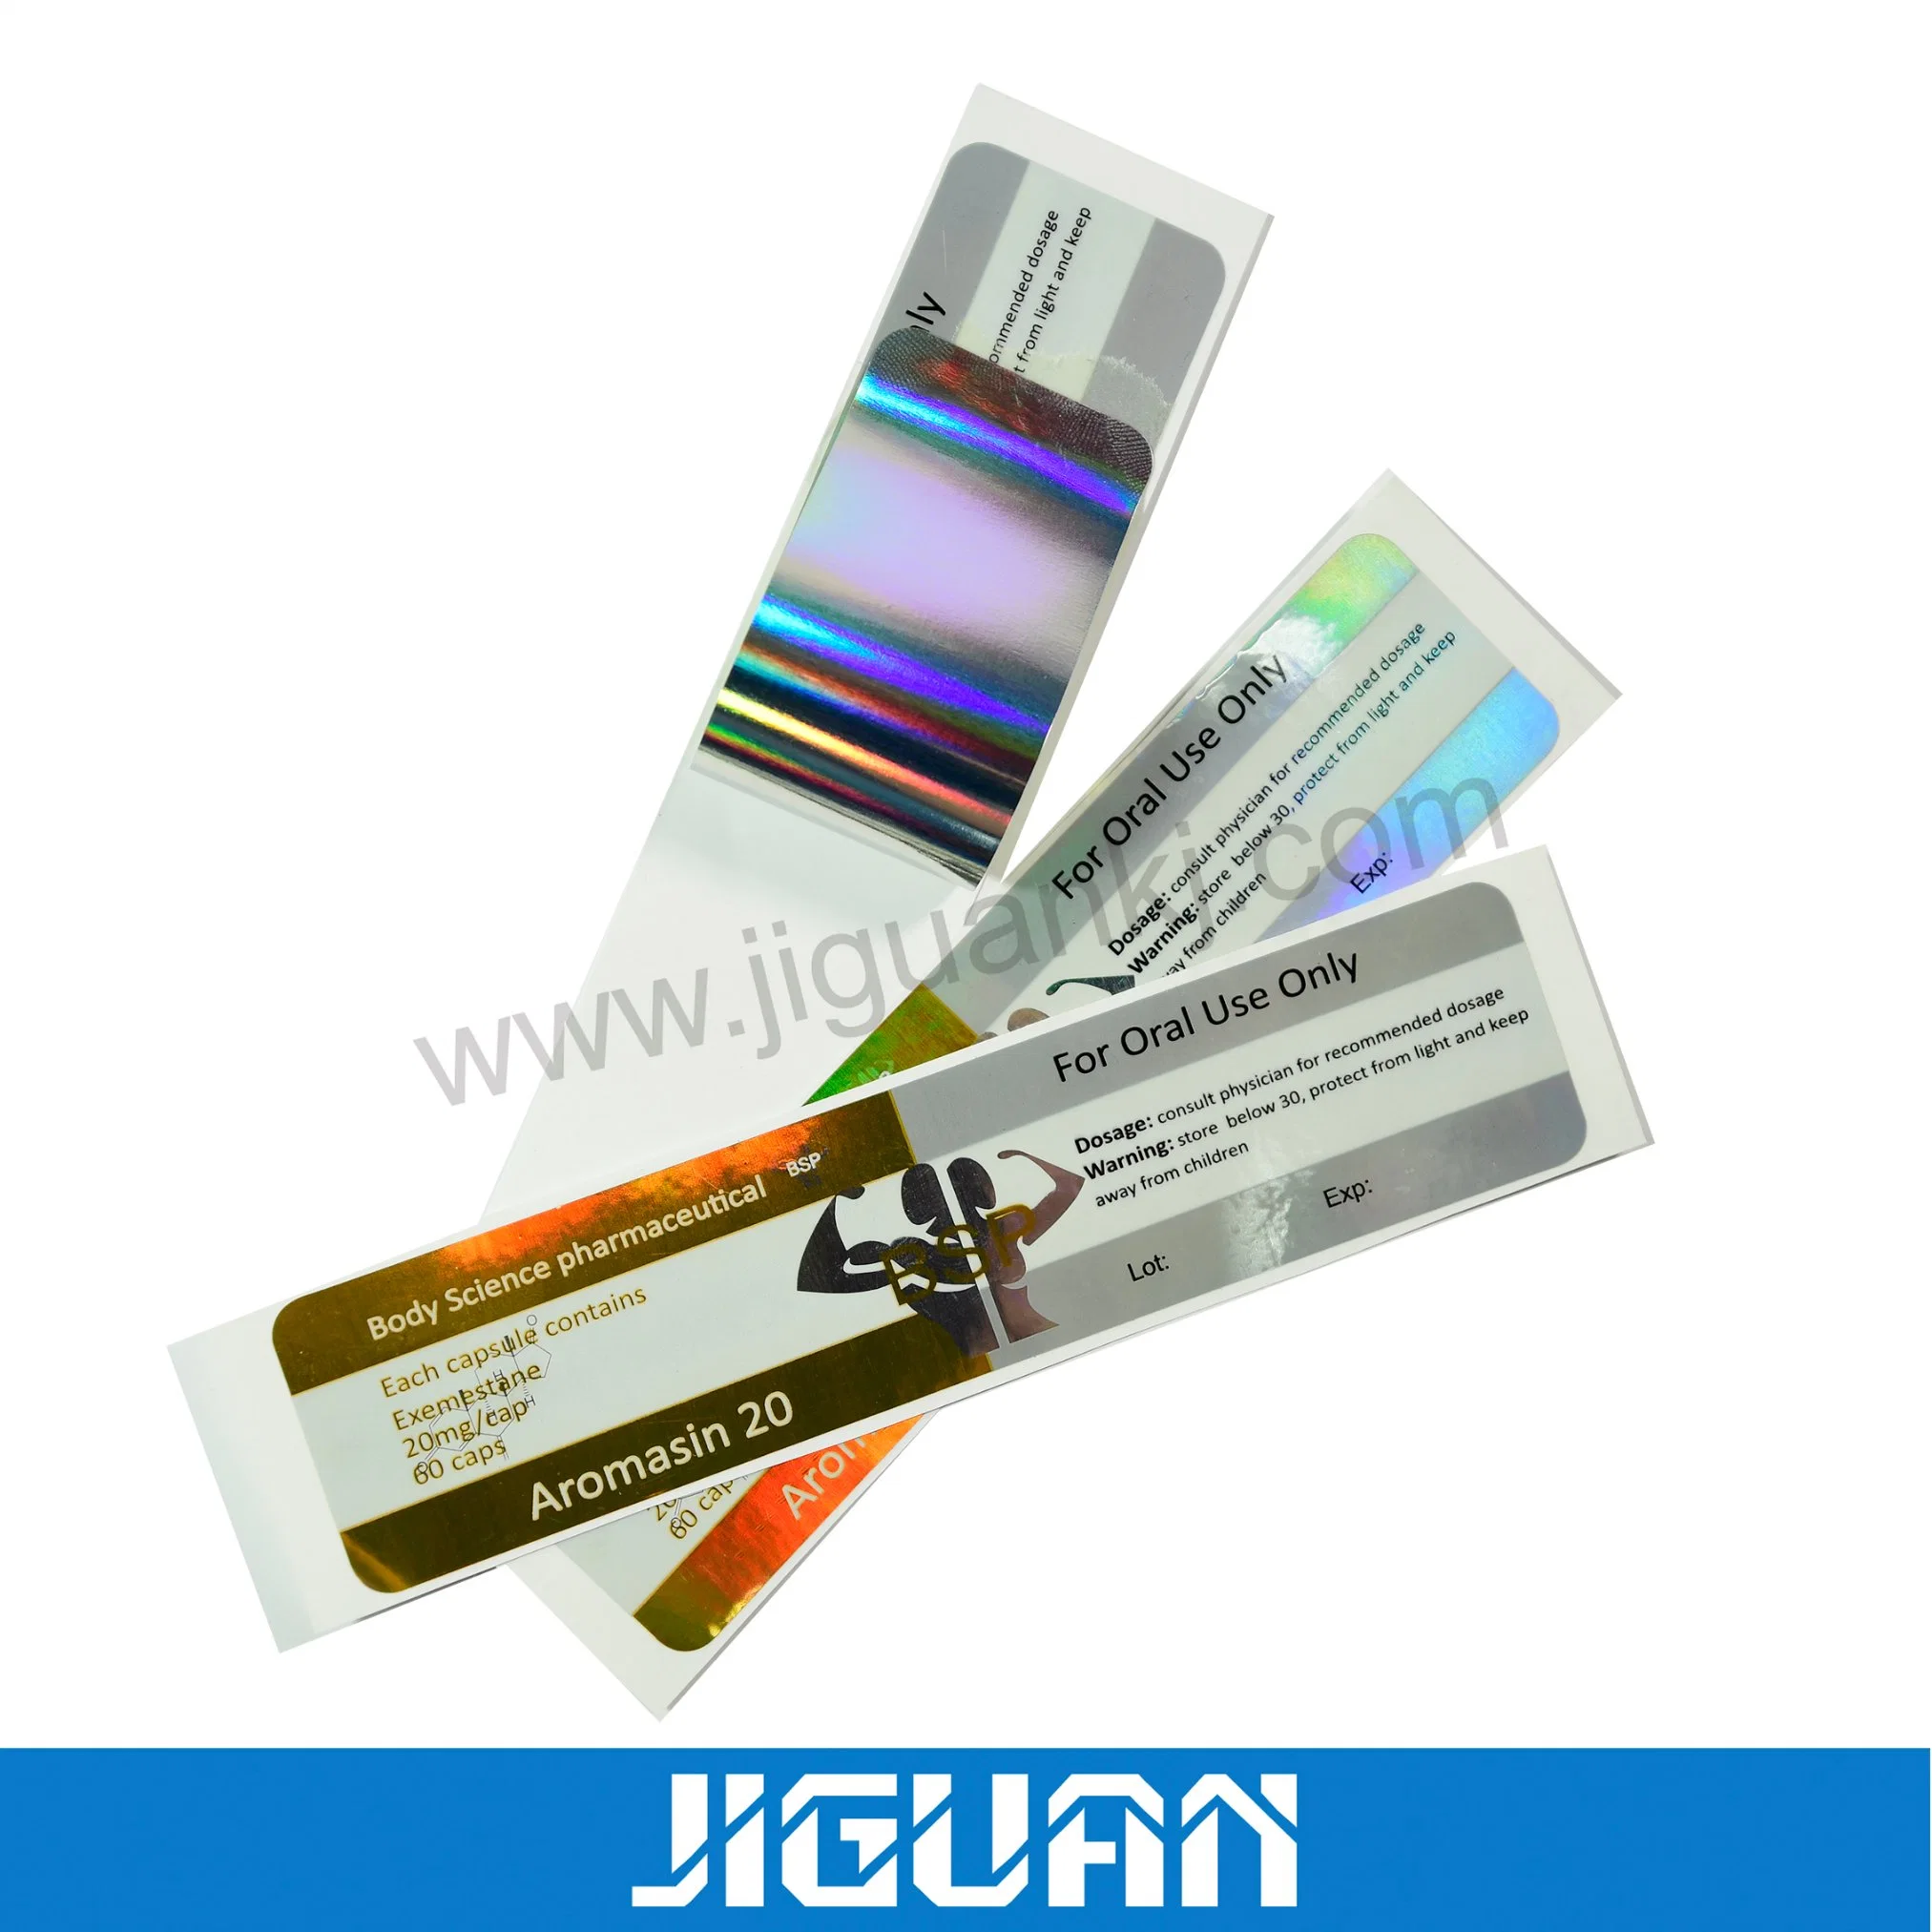 Hologram Adhesive Sticker Vial Label for Steroids